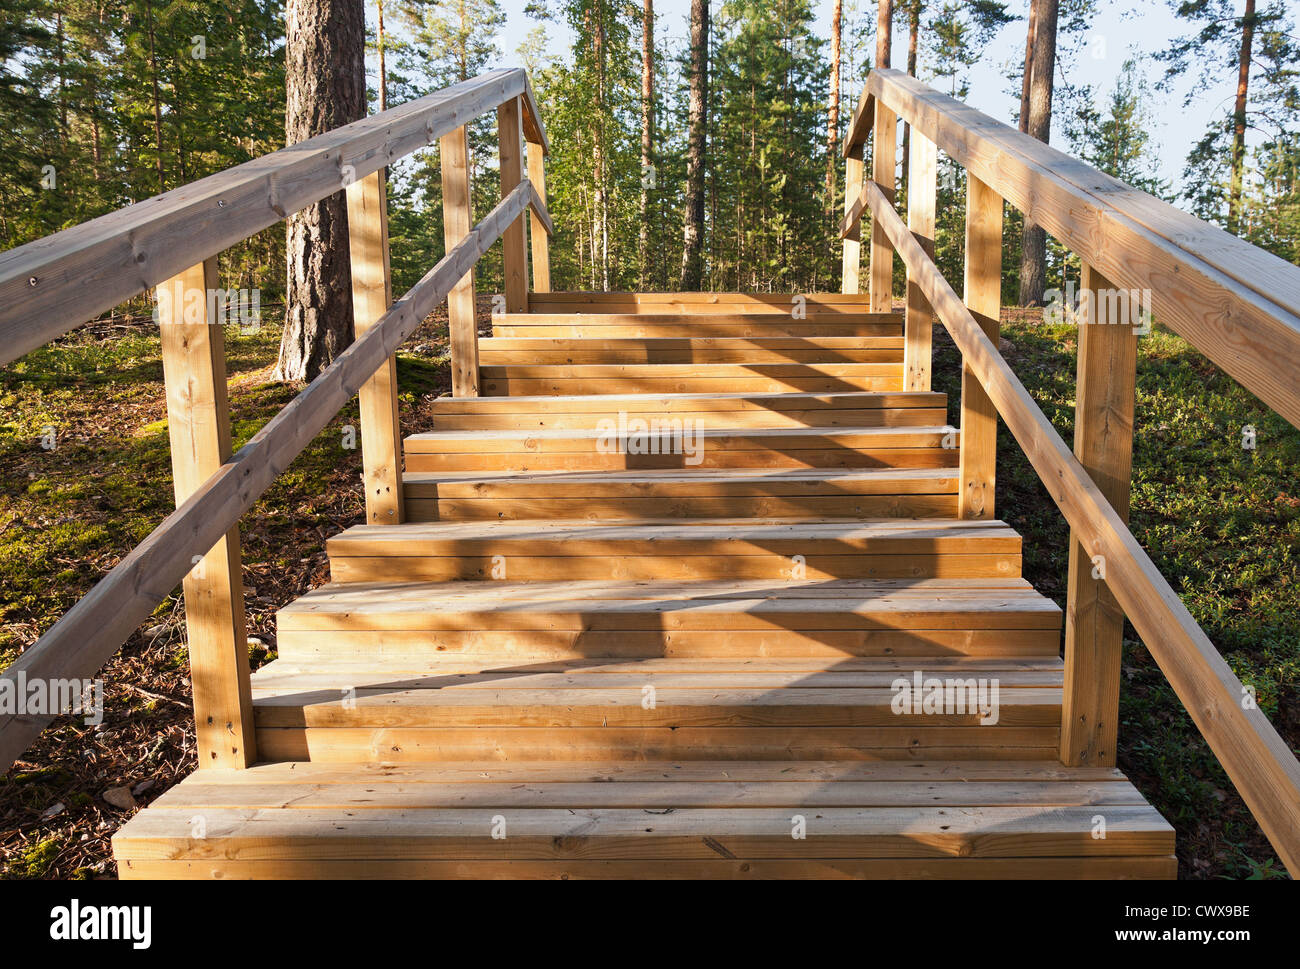 Wooden stairway goes up in the forest. Imatra town, Finland Stock Photo